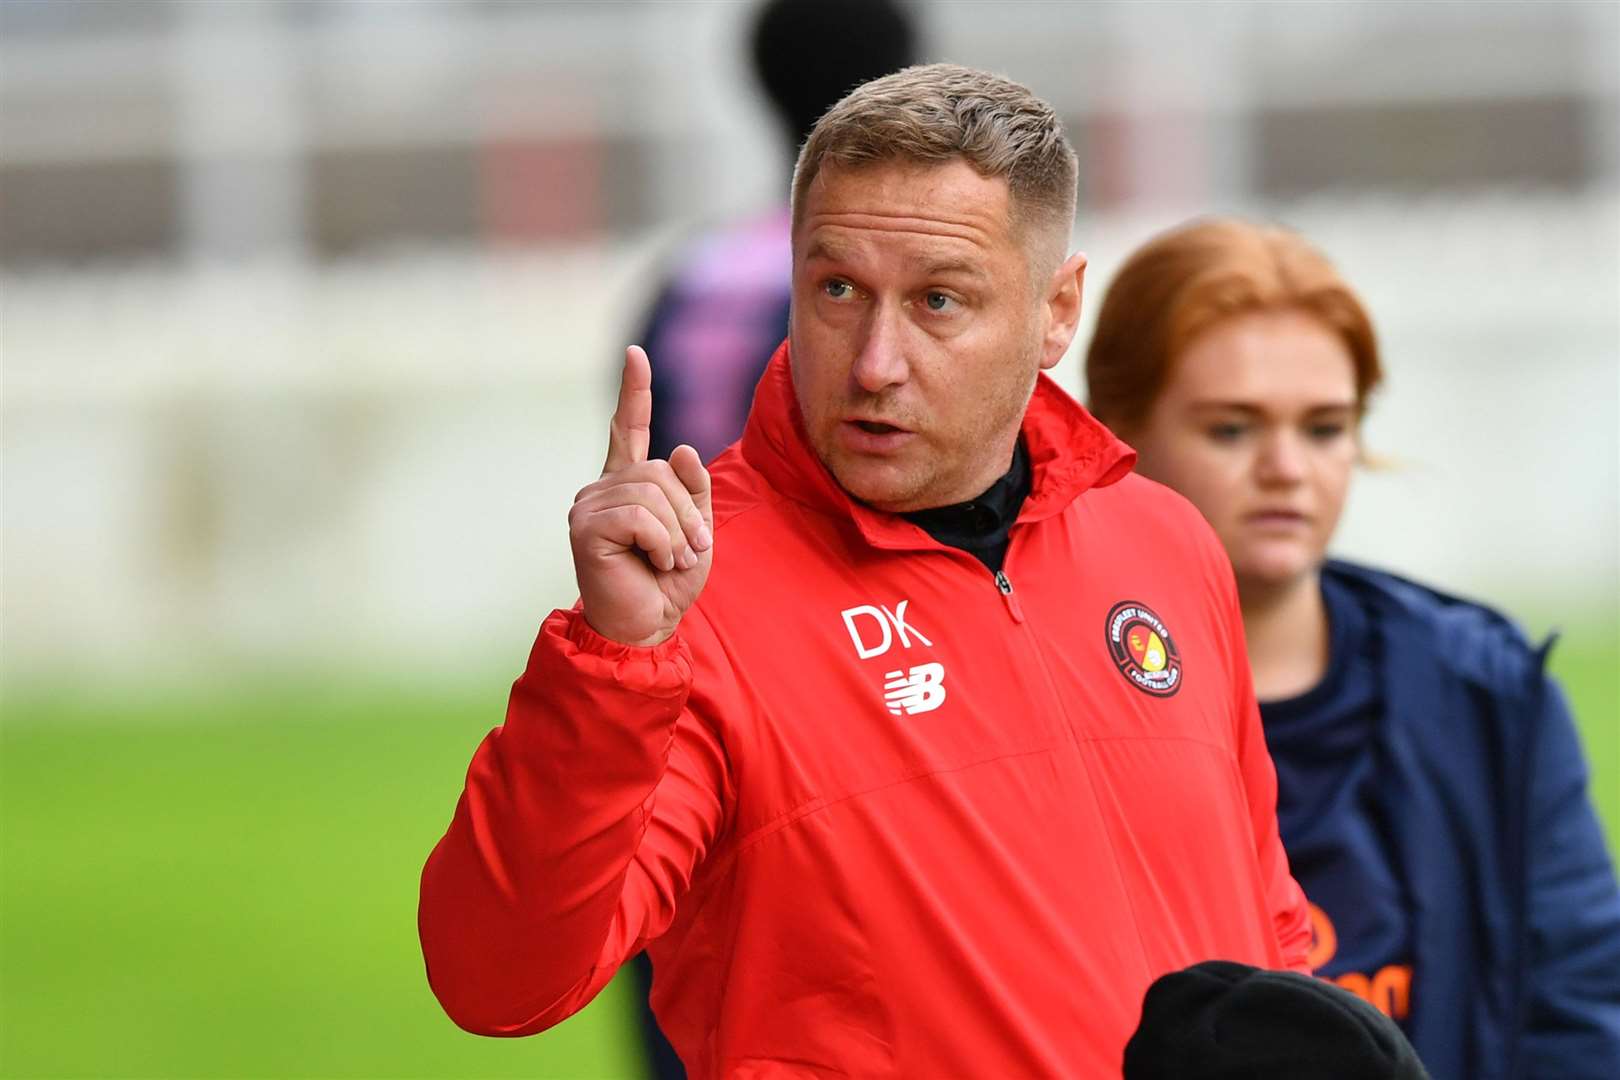 Ebbsfleet United manager Dennis Kutrieb. His team are without a game this weekend after their opponents Bath City pulled out Picture: Keith Gillard